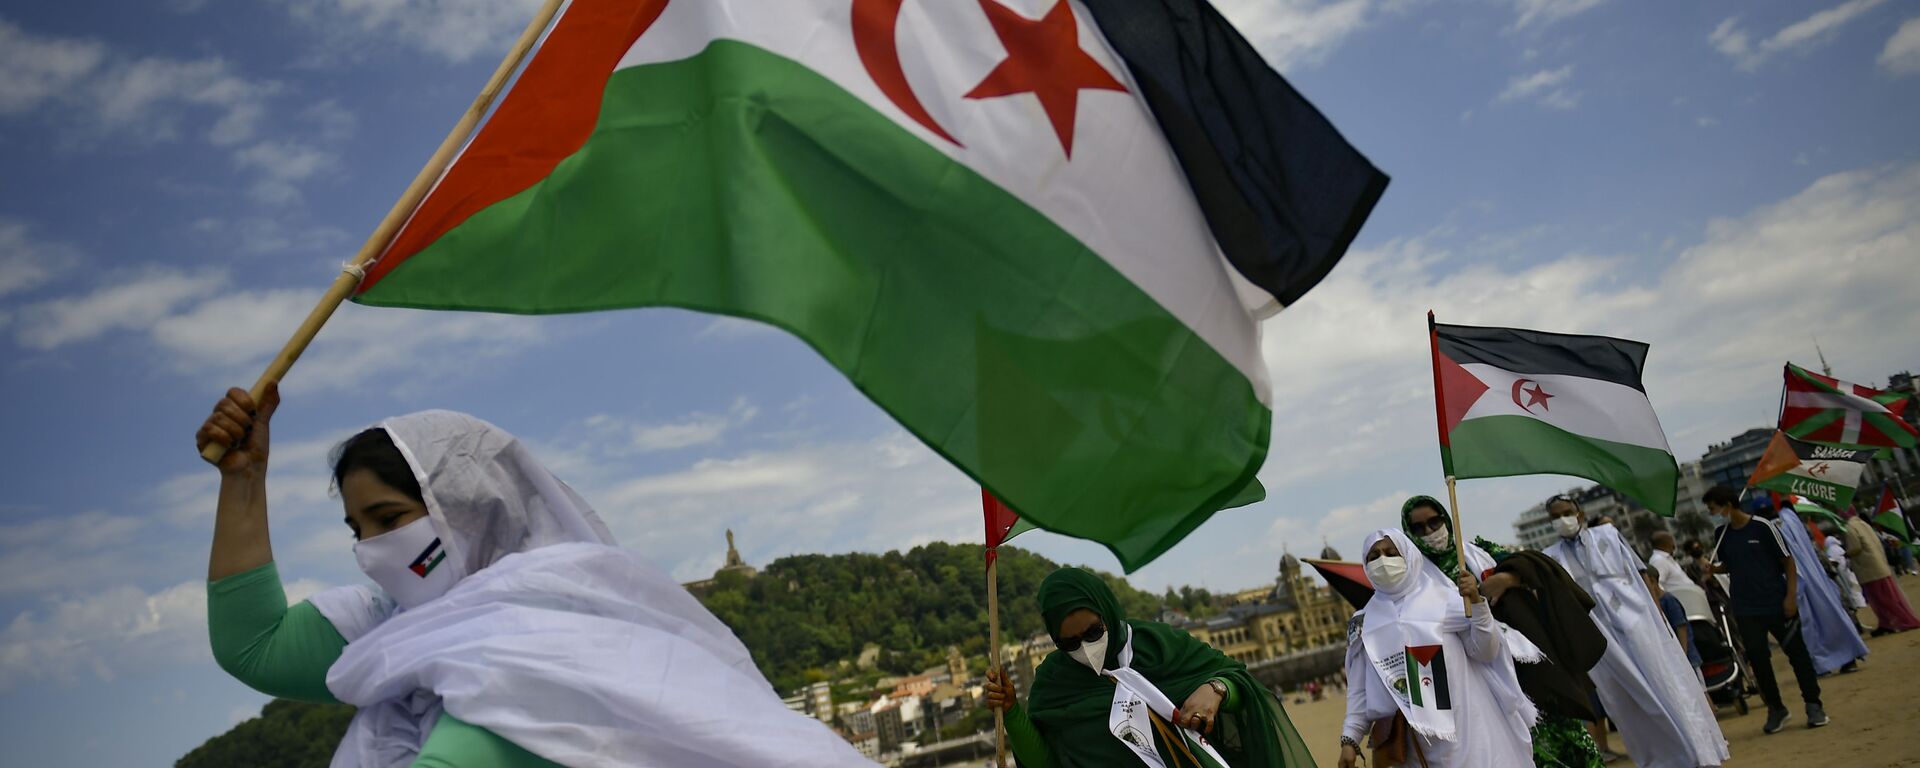 Saharan demonstrator wave their flags as they take part in a rally along the Concha beach support Brahim Gali, leader of the Polisario Front and a Sahara free, in San Sebastian, northern Spain, Sunday, May 30, 2021. Brahim Gali is recovering from COVID-19 in a Spanish hospital. The leader of the Western Sahara independence movement at the heart of a diplomatic spat between Spain and Morocco will appear before an investigating judge in Spain on June 1. - Sputnik International, 1920, 26.08.2022